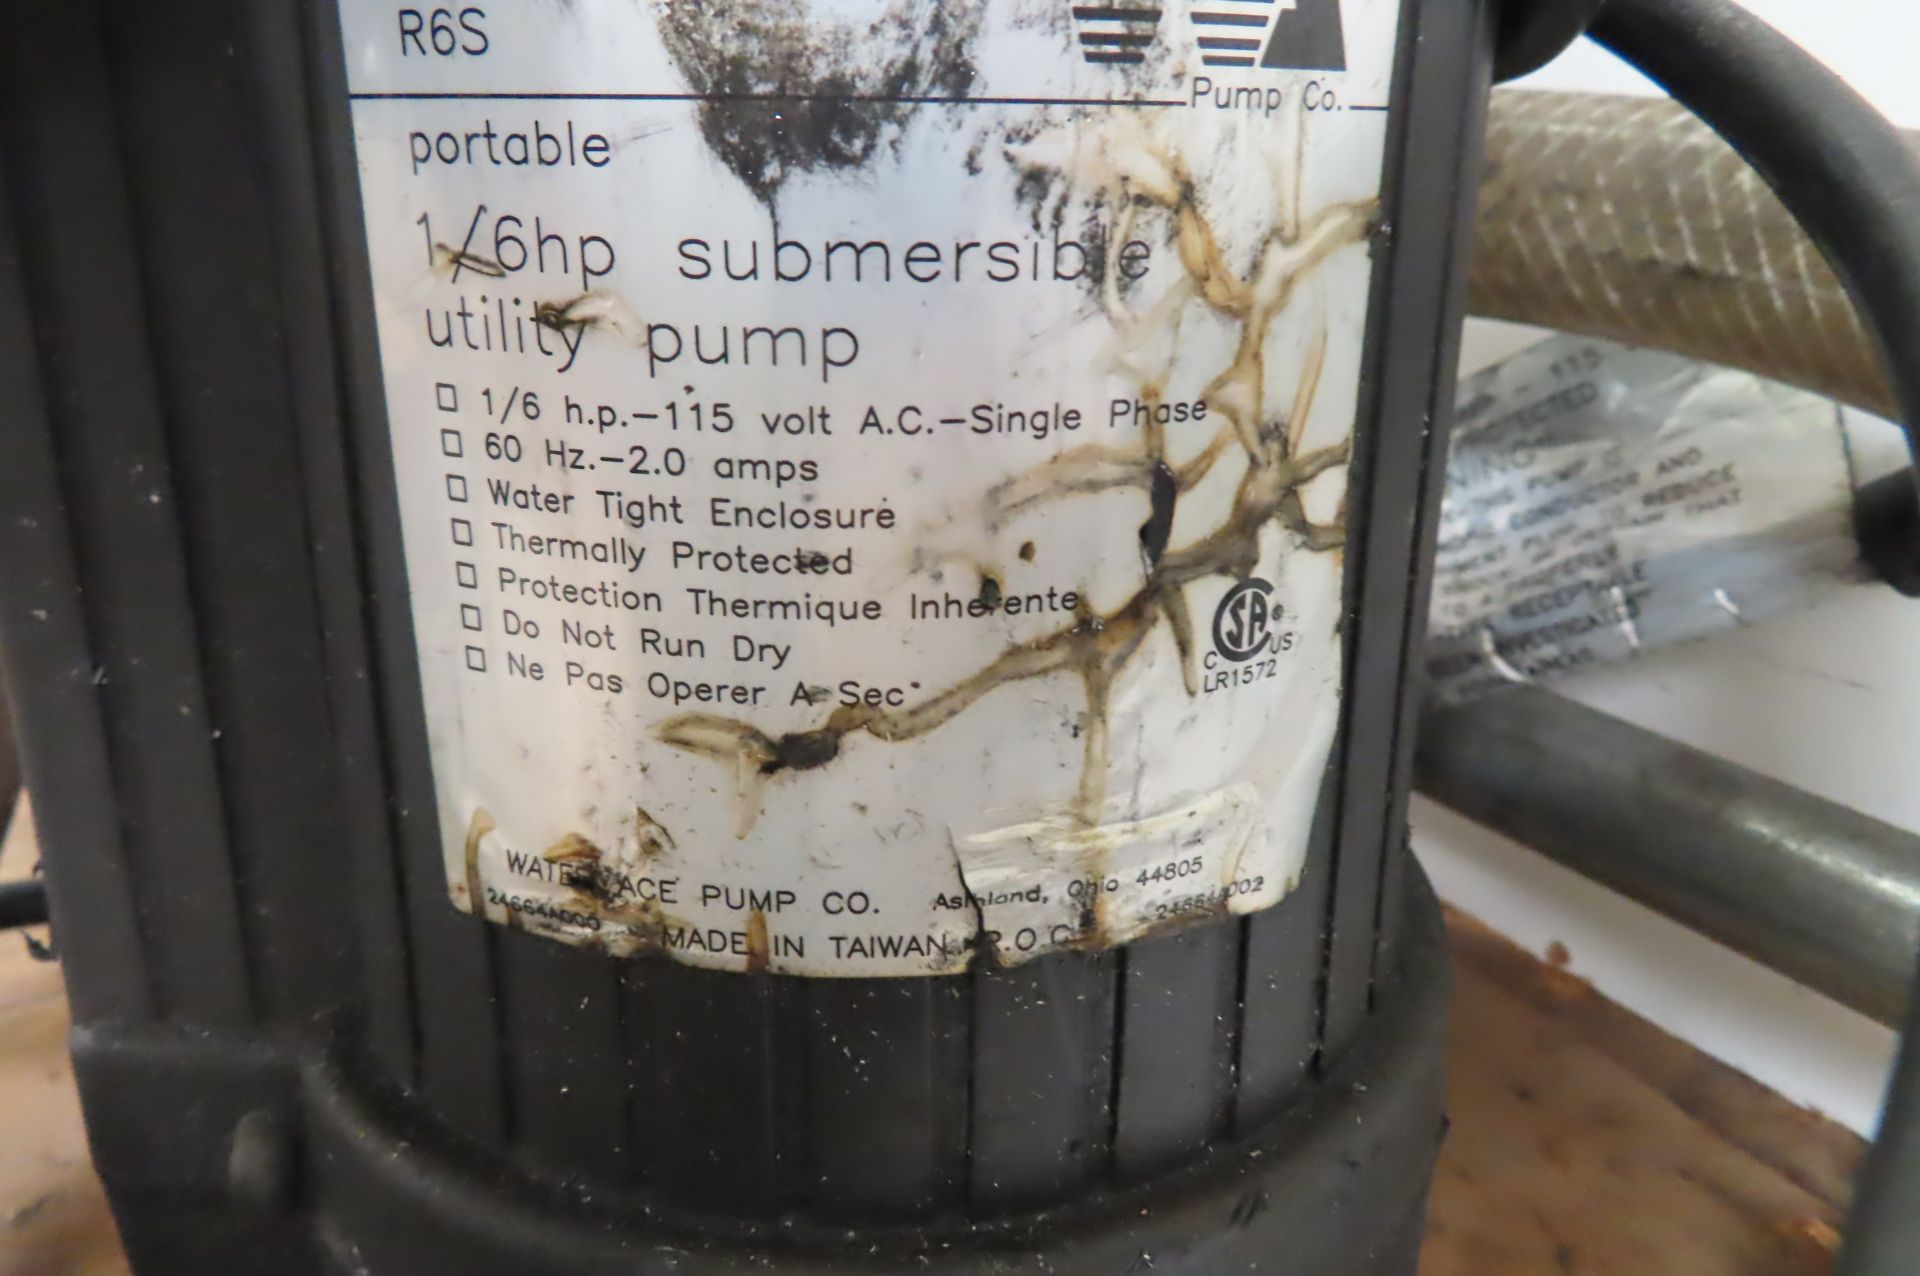 WATER ACE R6S SUBMERSIBLE PUMP - Image 2 of 2